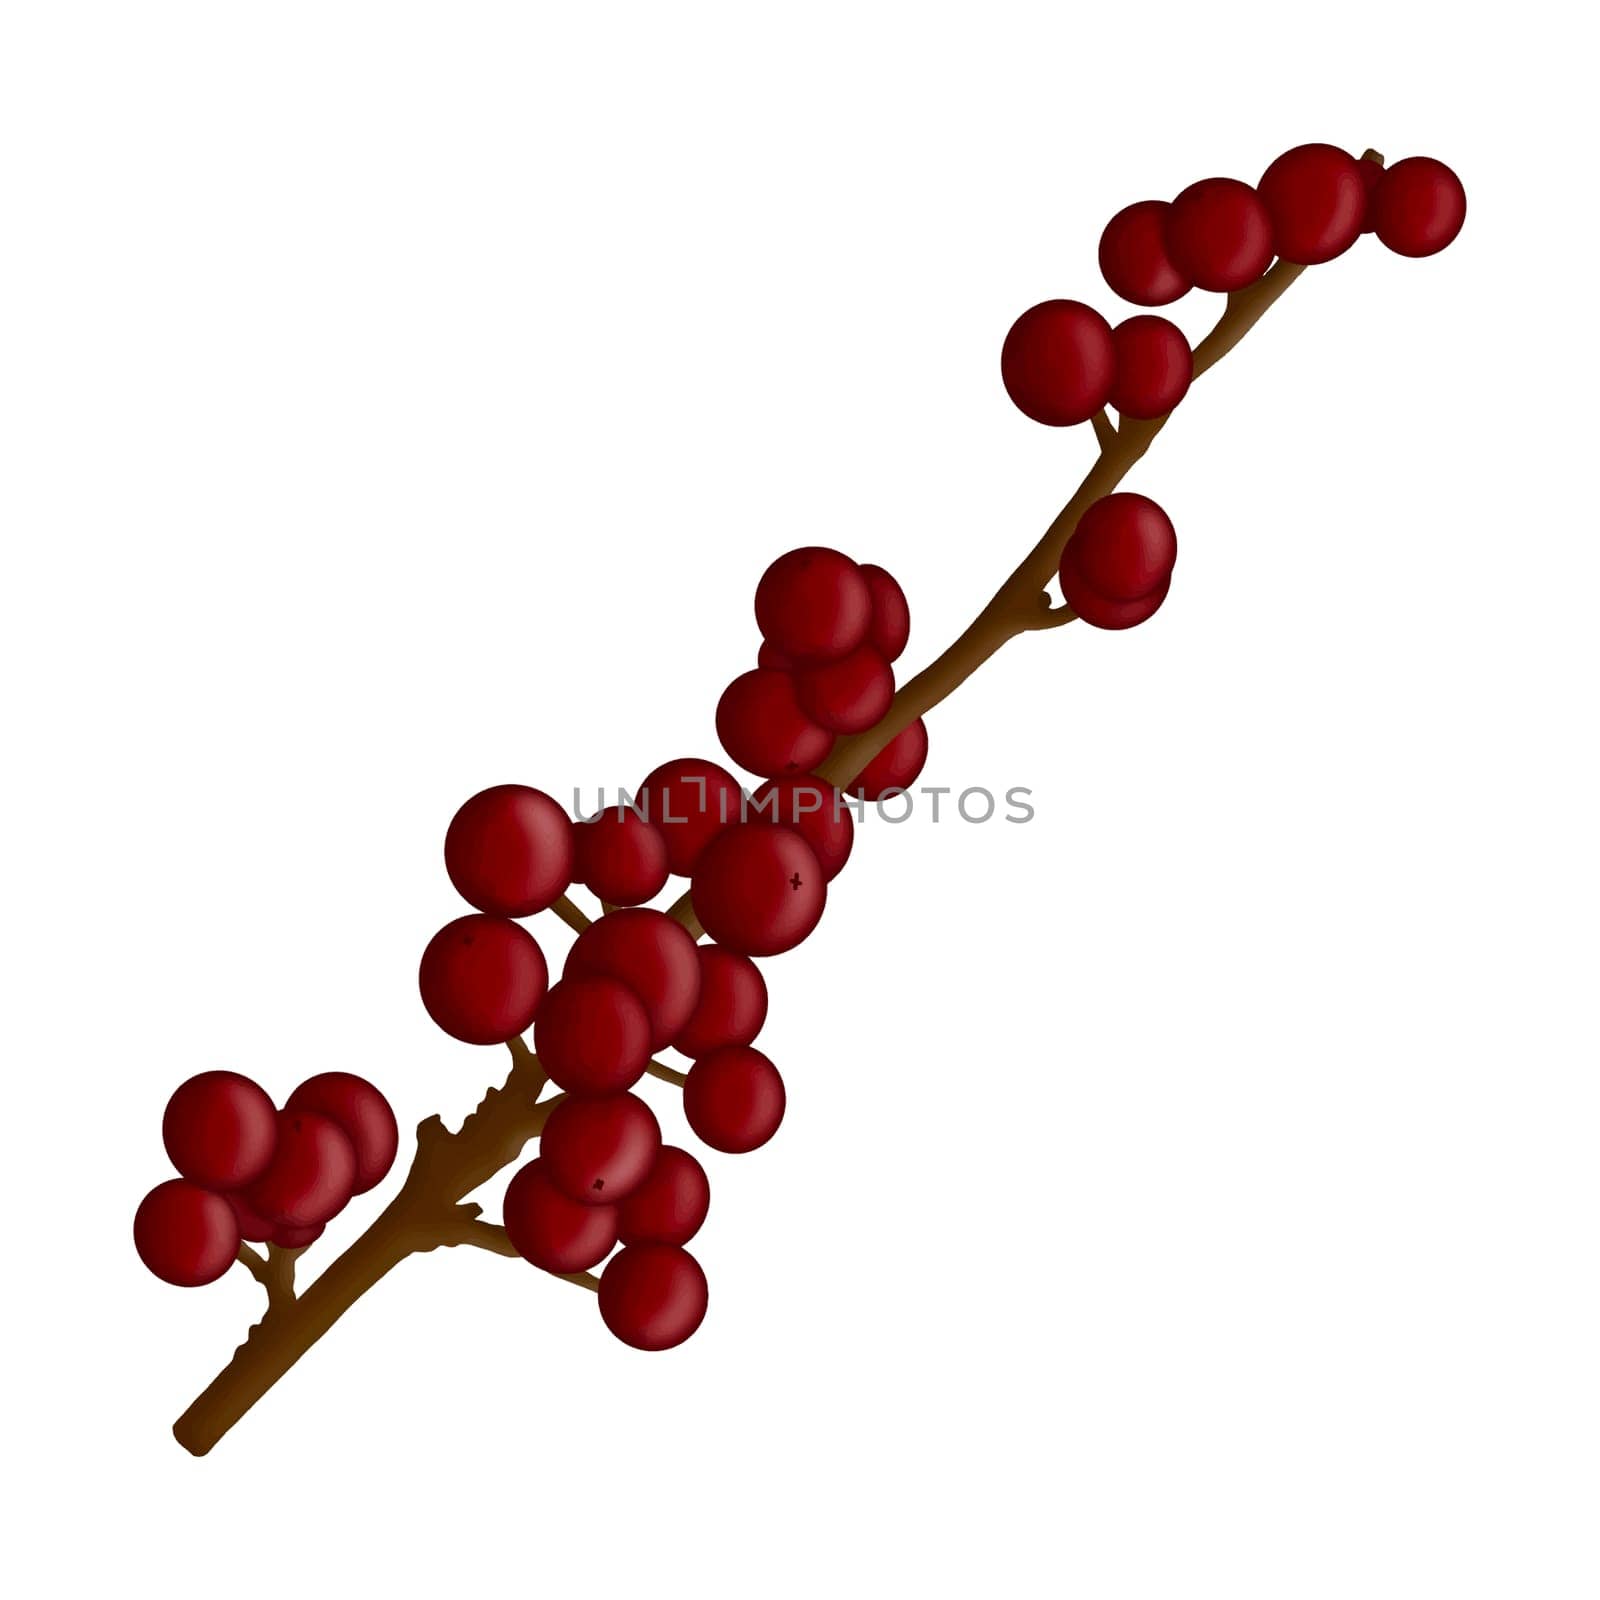 Winterberries branch christmas floral element isolated on white background. Botanical illustration for Xmas design by Skyecreativestudio